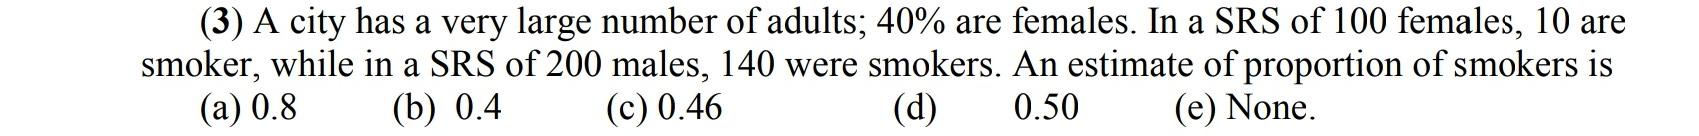 3 A City Has A Very Large Number Of Adults 40 Are Females In A Srs Of 100 Females 10 Are Smoker While In A Srs Of 1